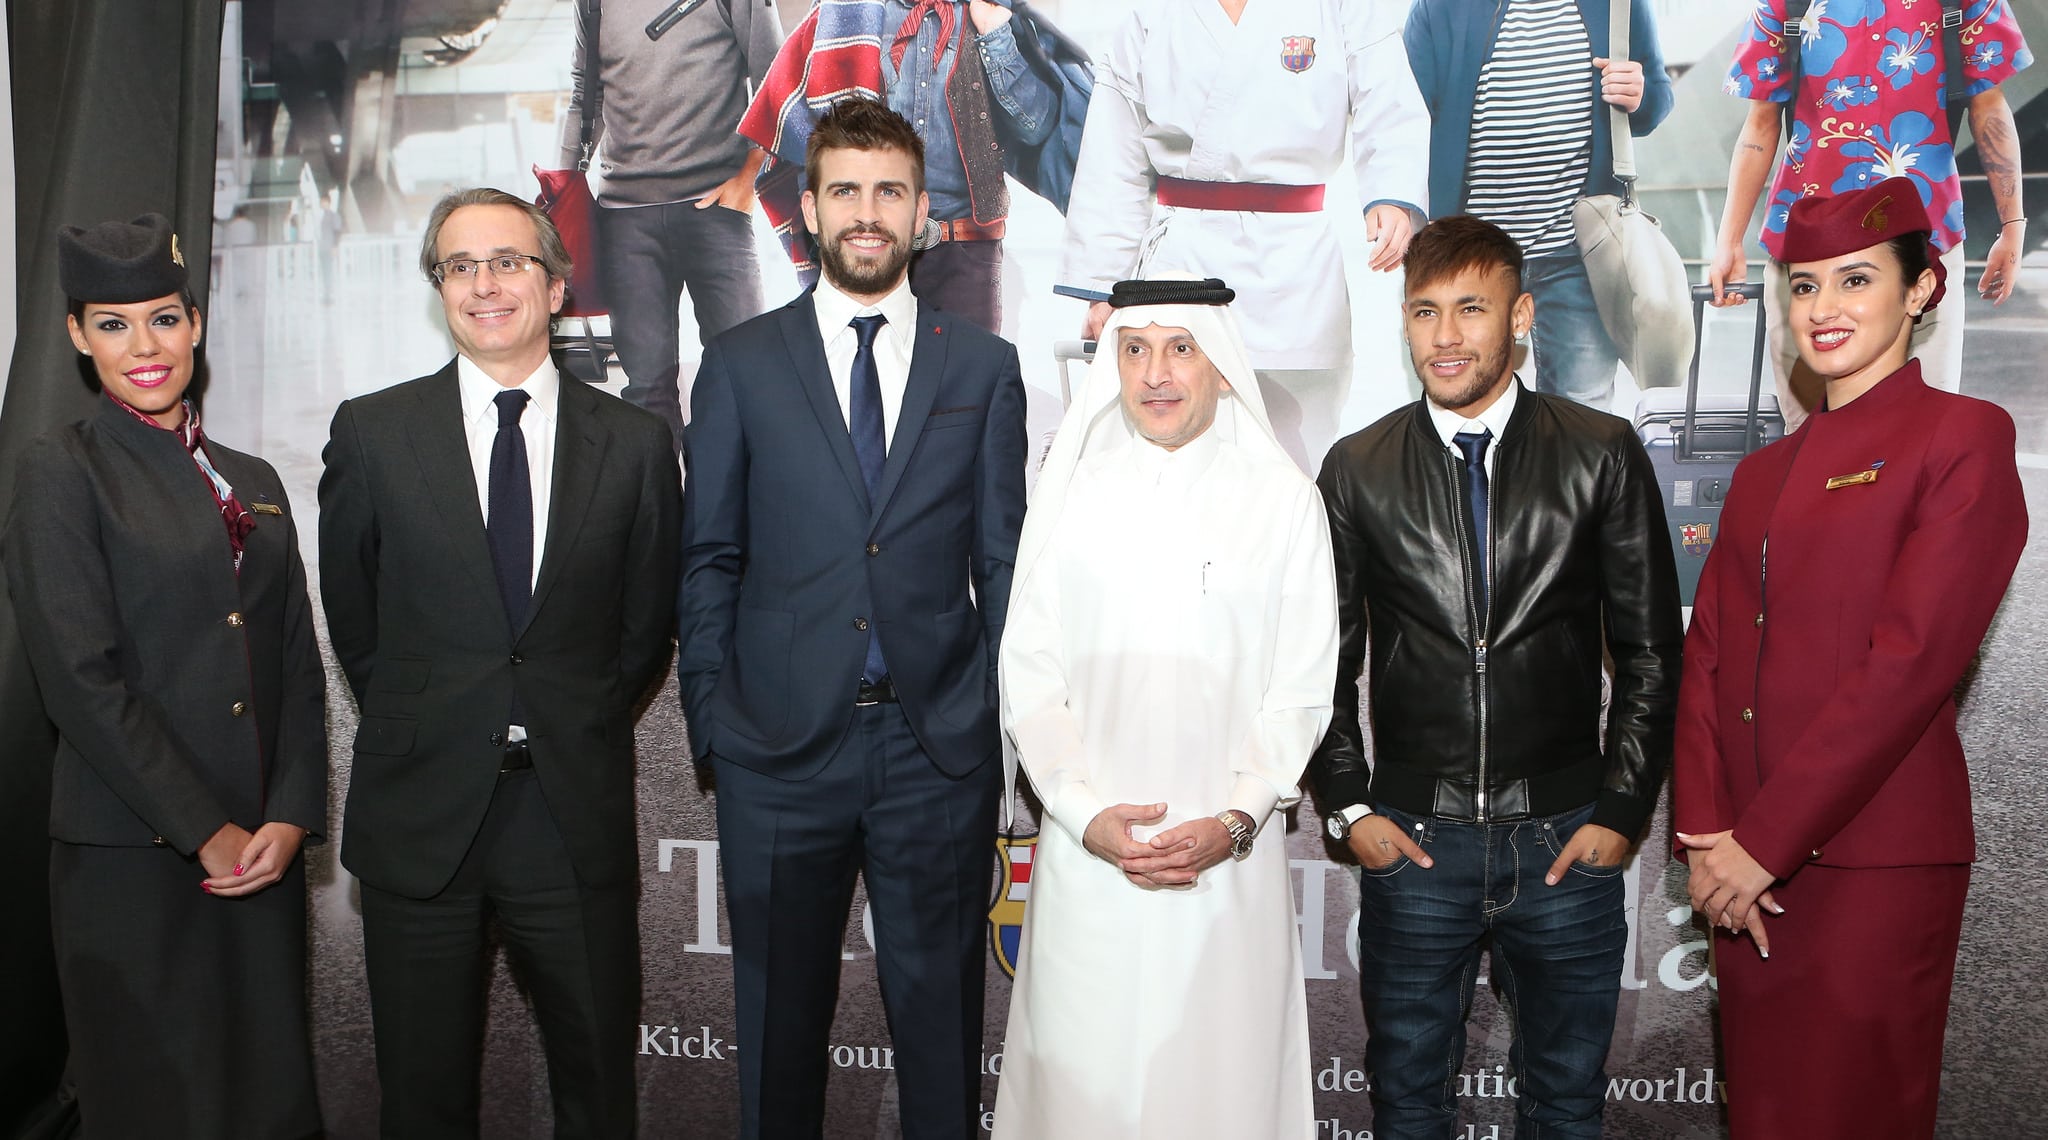 Qatar Airways Group CEO His Excellency Mr. Akbar Al Baker and Vice President Economic and Strategic Area of FC Barcelona Mr. Javier Faus with two of FCB’s First Team players, Gerard Piqué and Neymar Jr at a press conference.